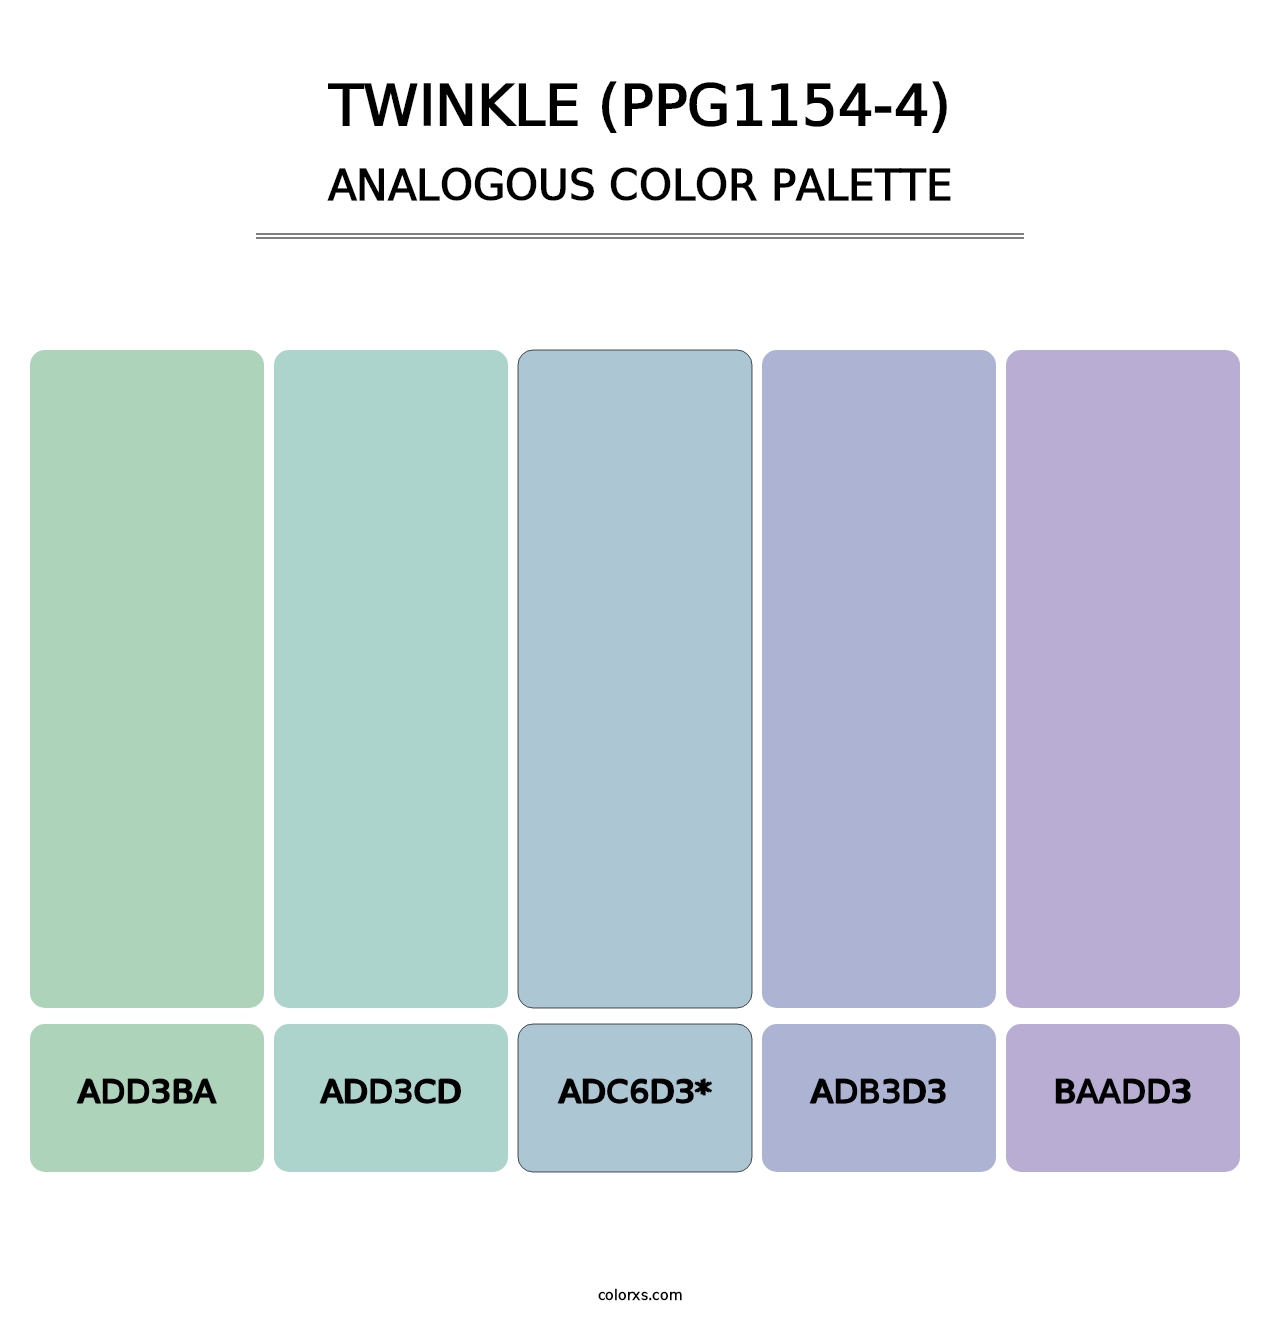 Twinkle (PPG1154-4) - Analogous Color Palette